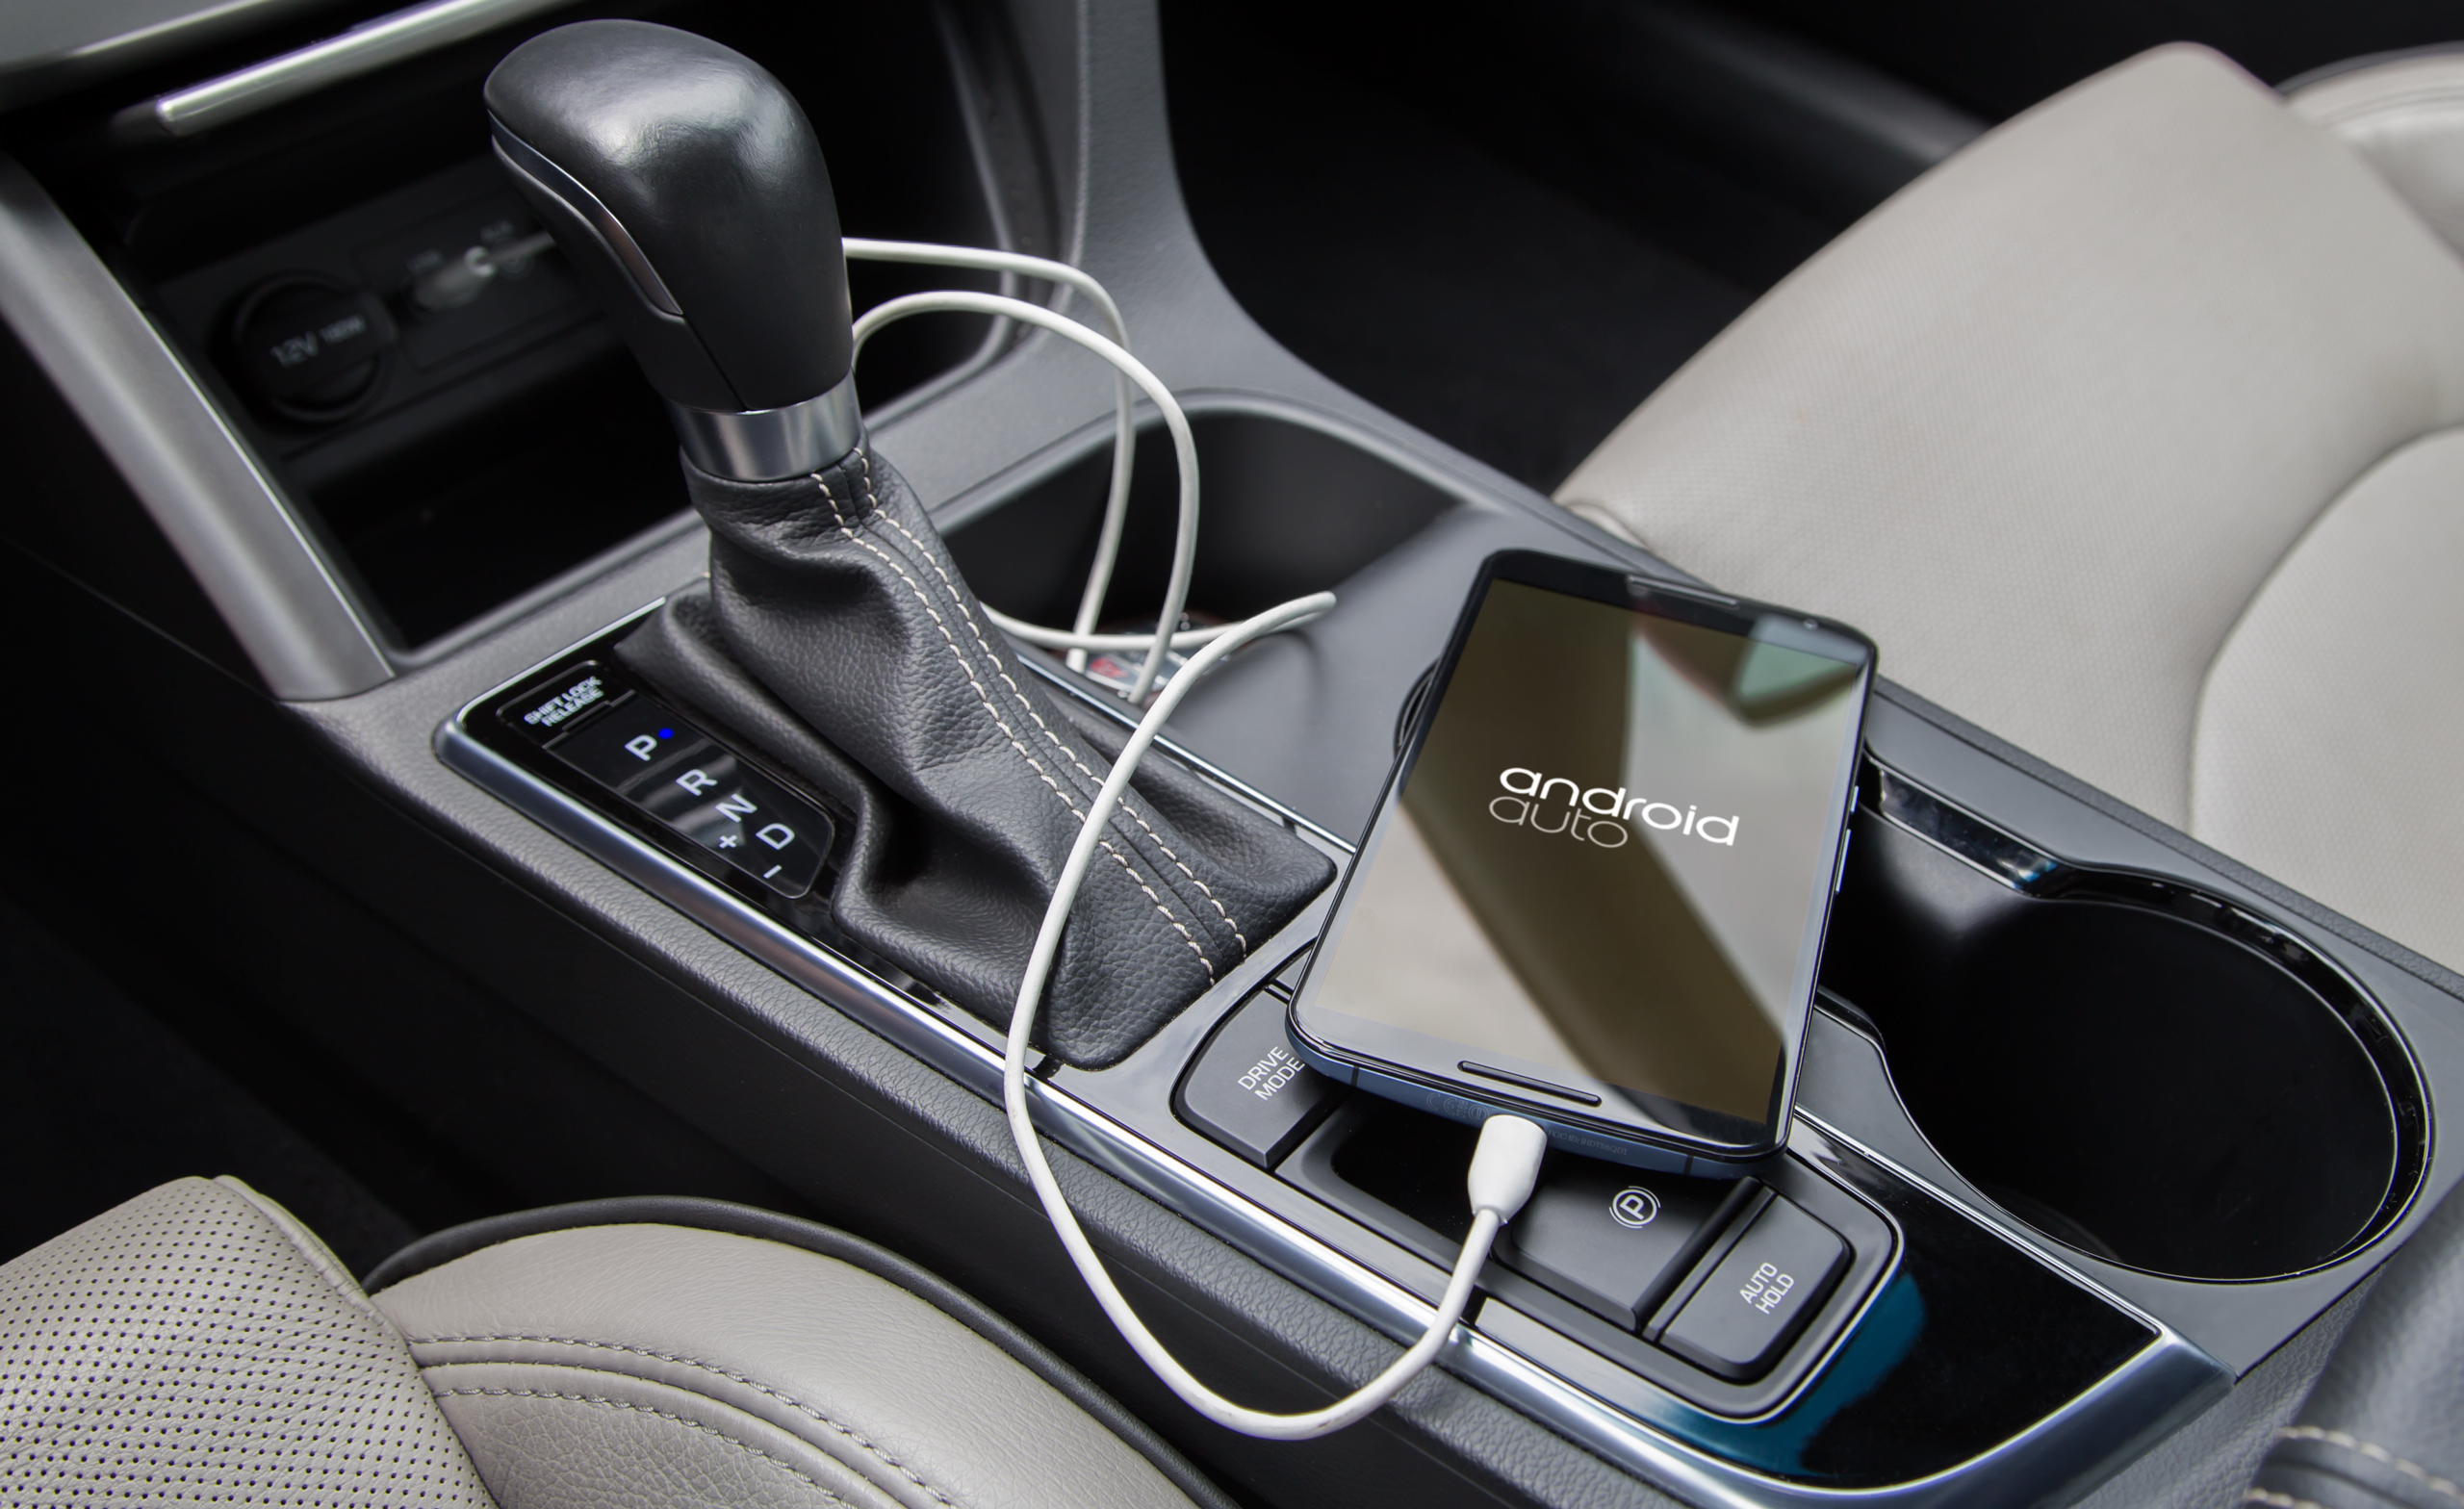 Google Android Auto App Will Now Tell You If Your USB Cable Has Gone Bad